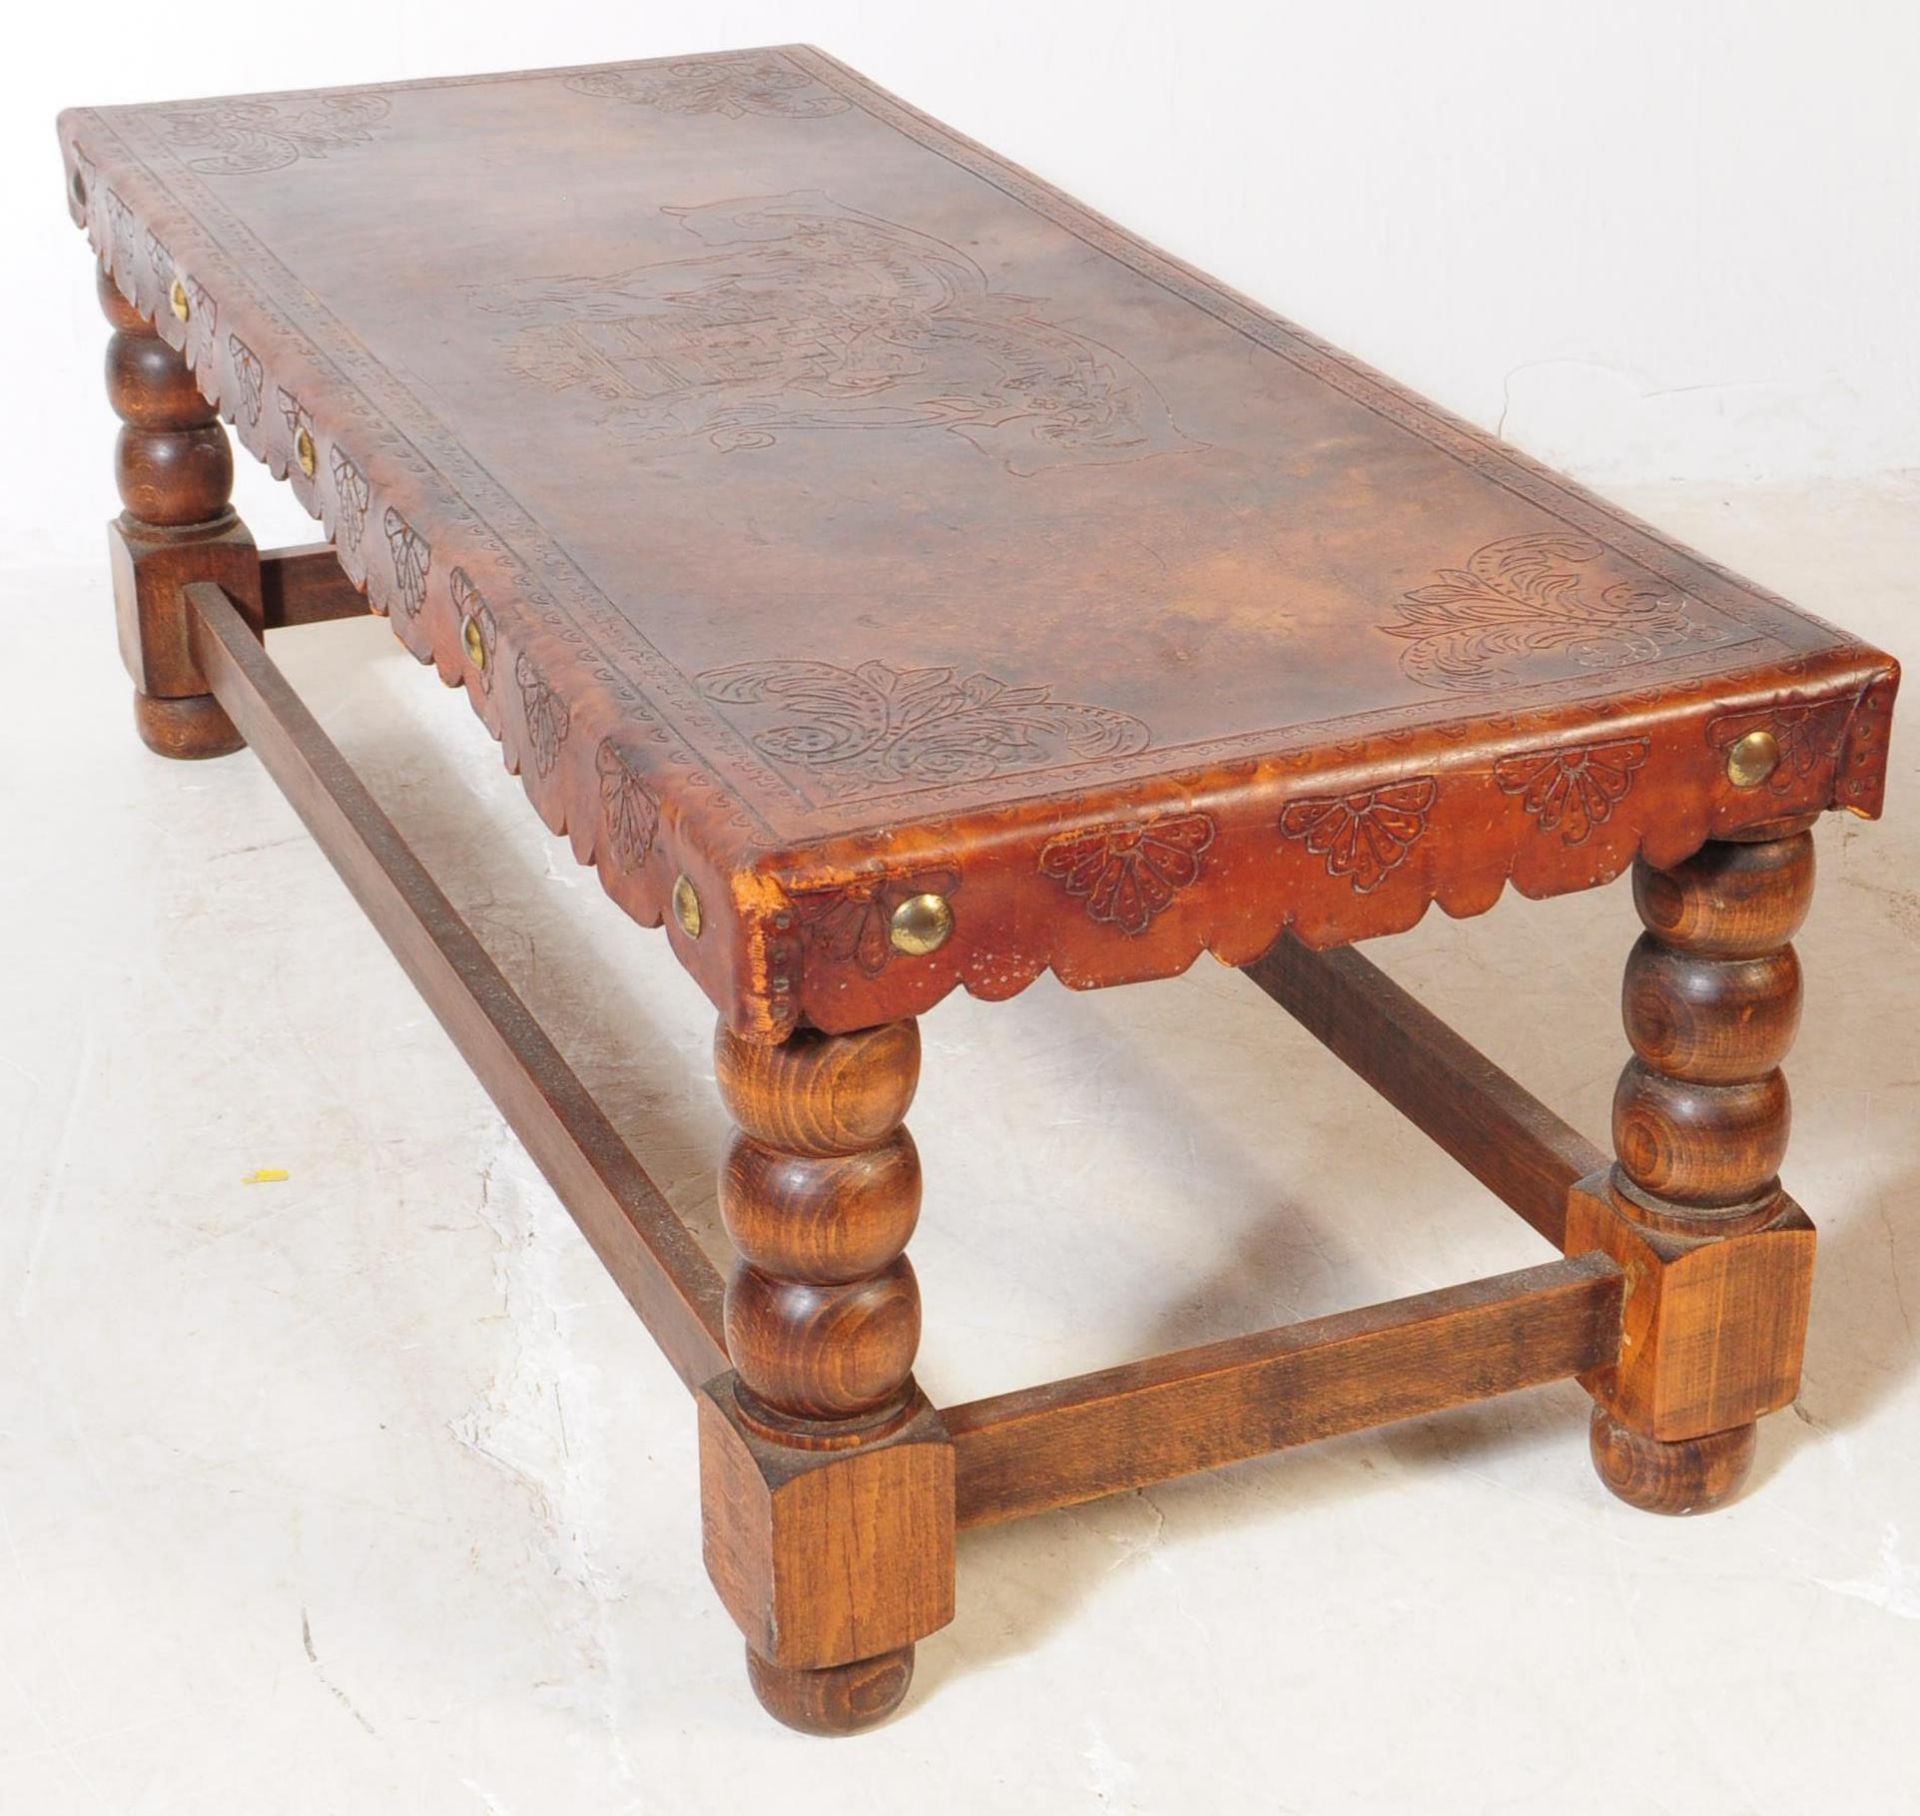 EARLY 20TH CENTURY LEATHER TOPPED OAK COFFEE TABLE - Image 5 of 5